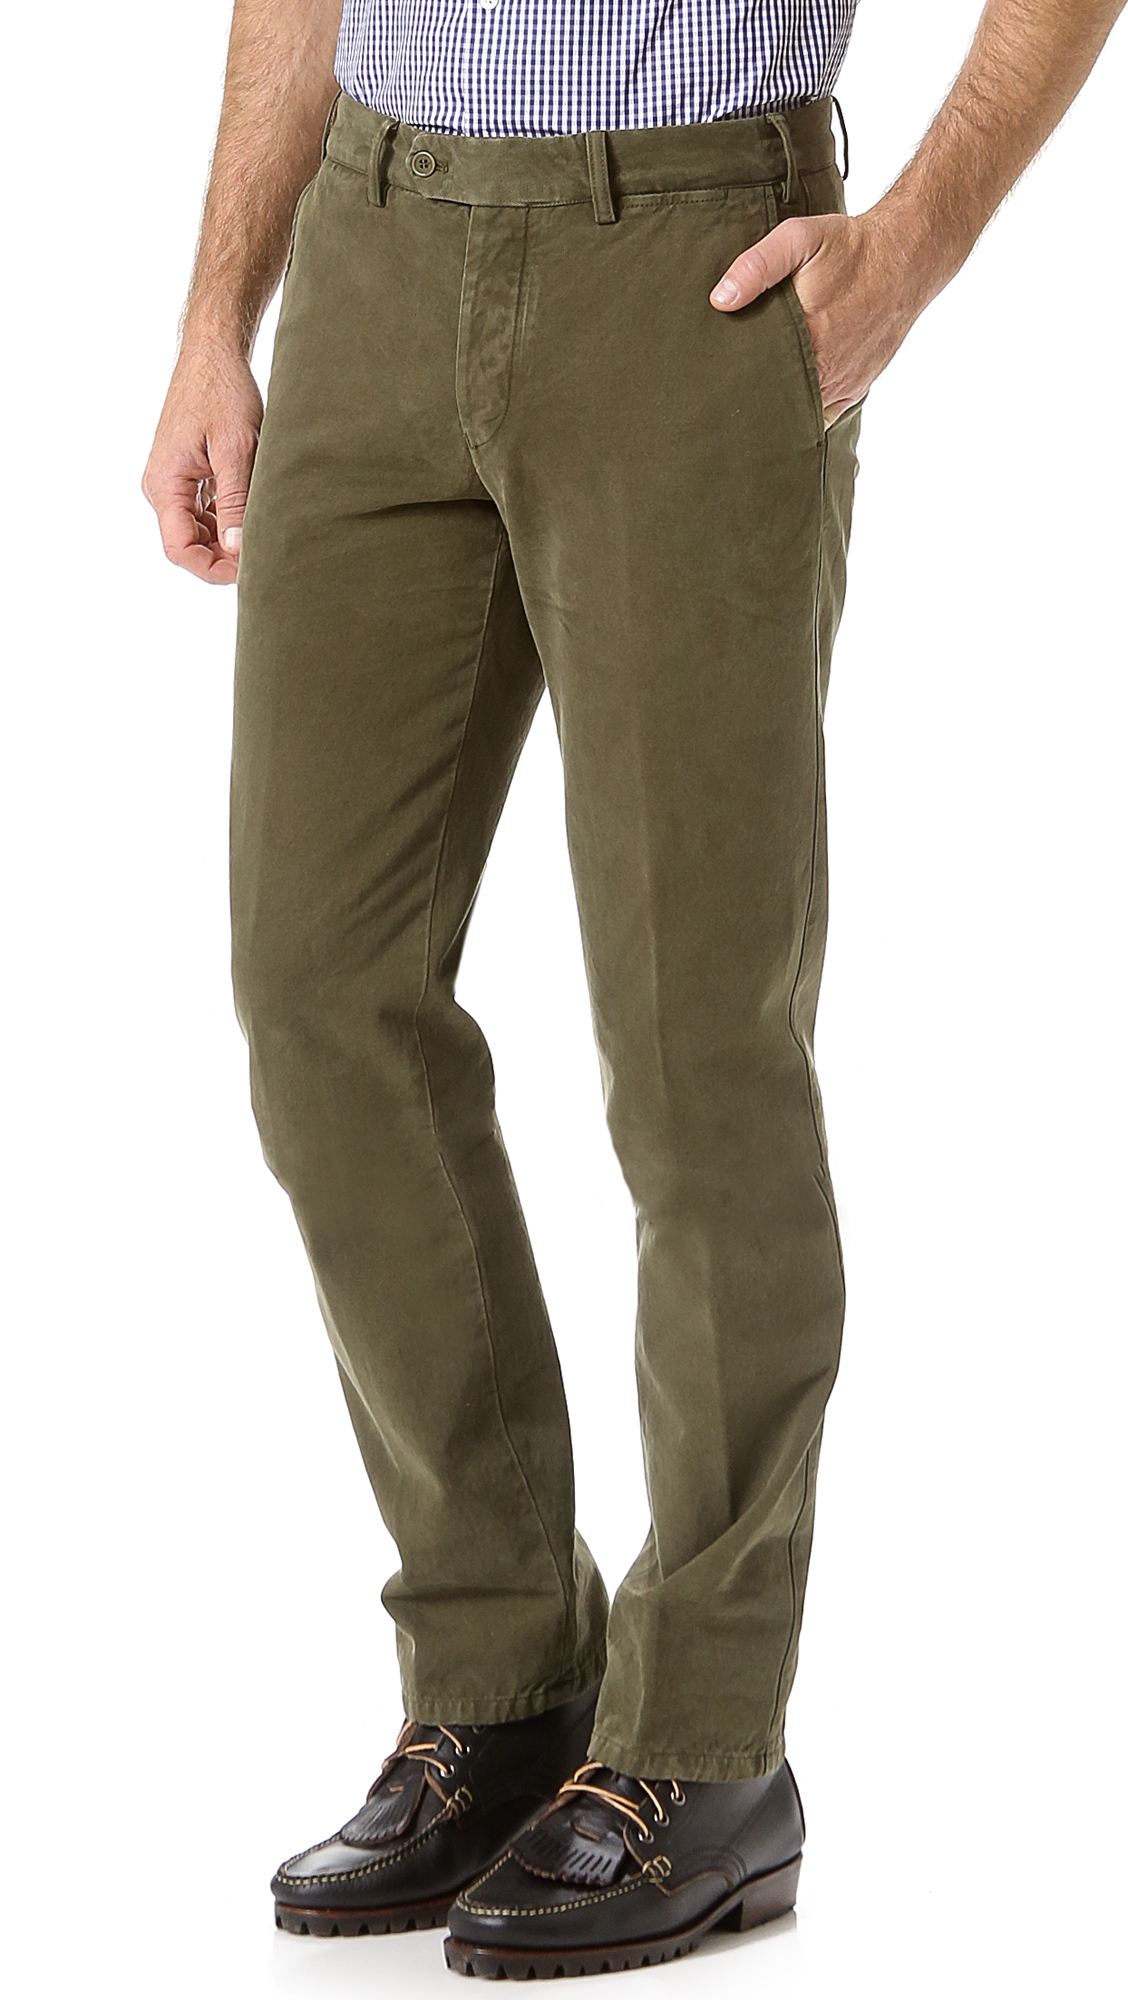 Lyst - Aspesi Brushed Twill Chinos in Green for Men